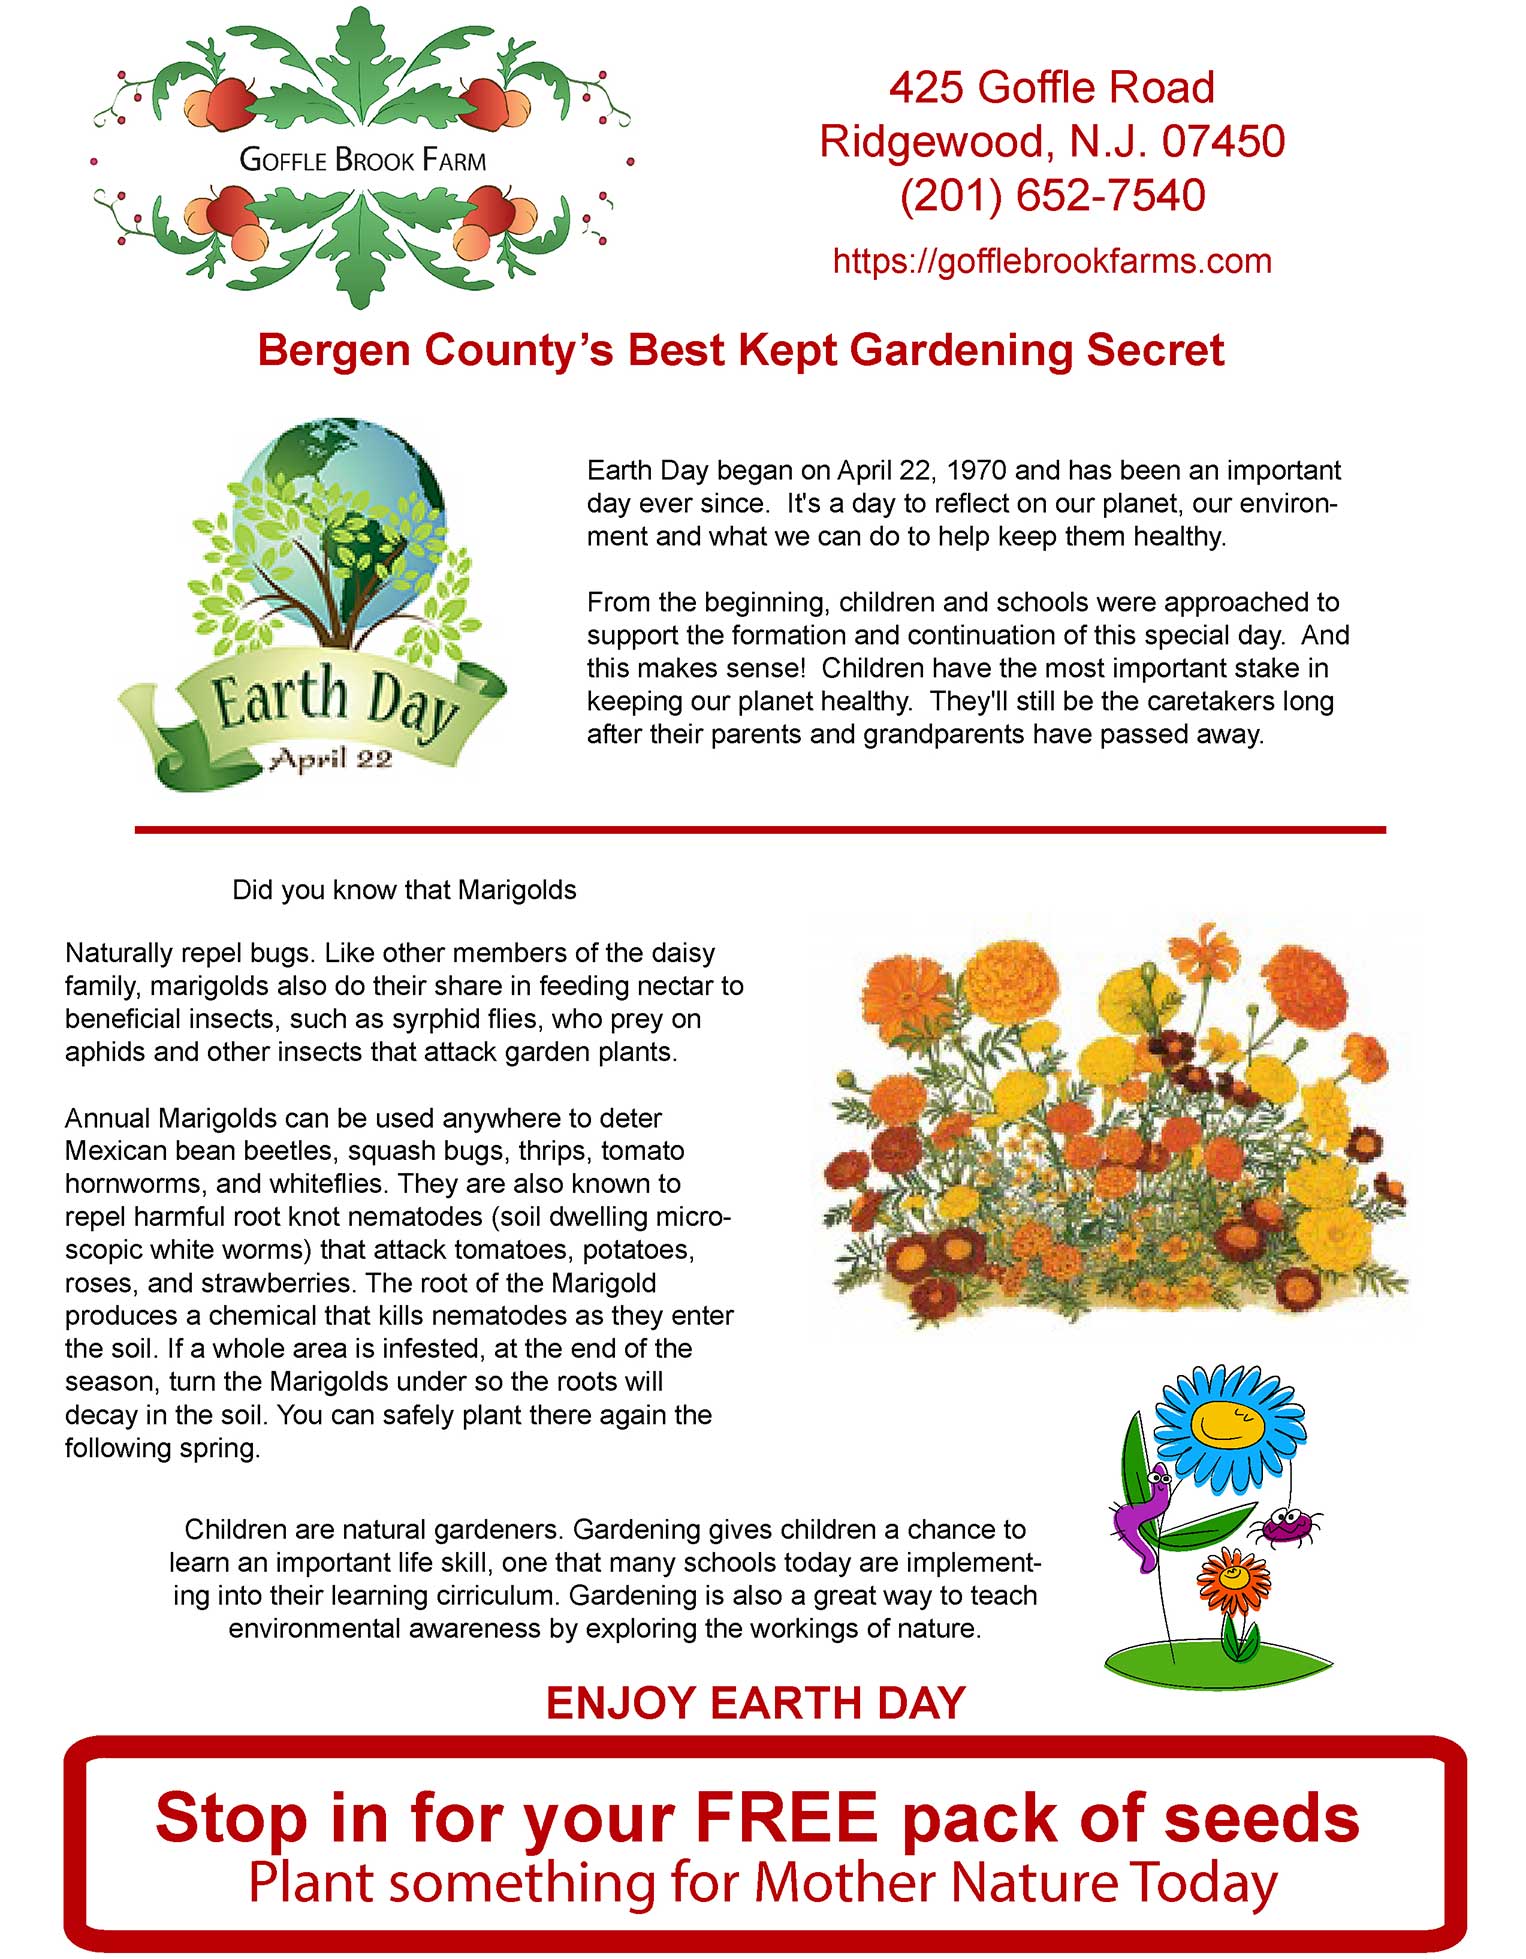 Celebrate Earth Day at Goffle Brook Farms